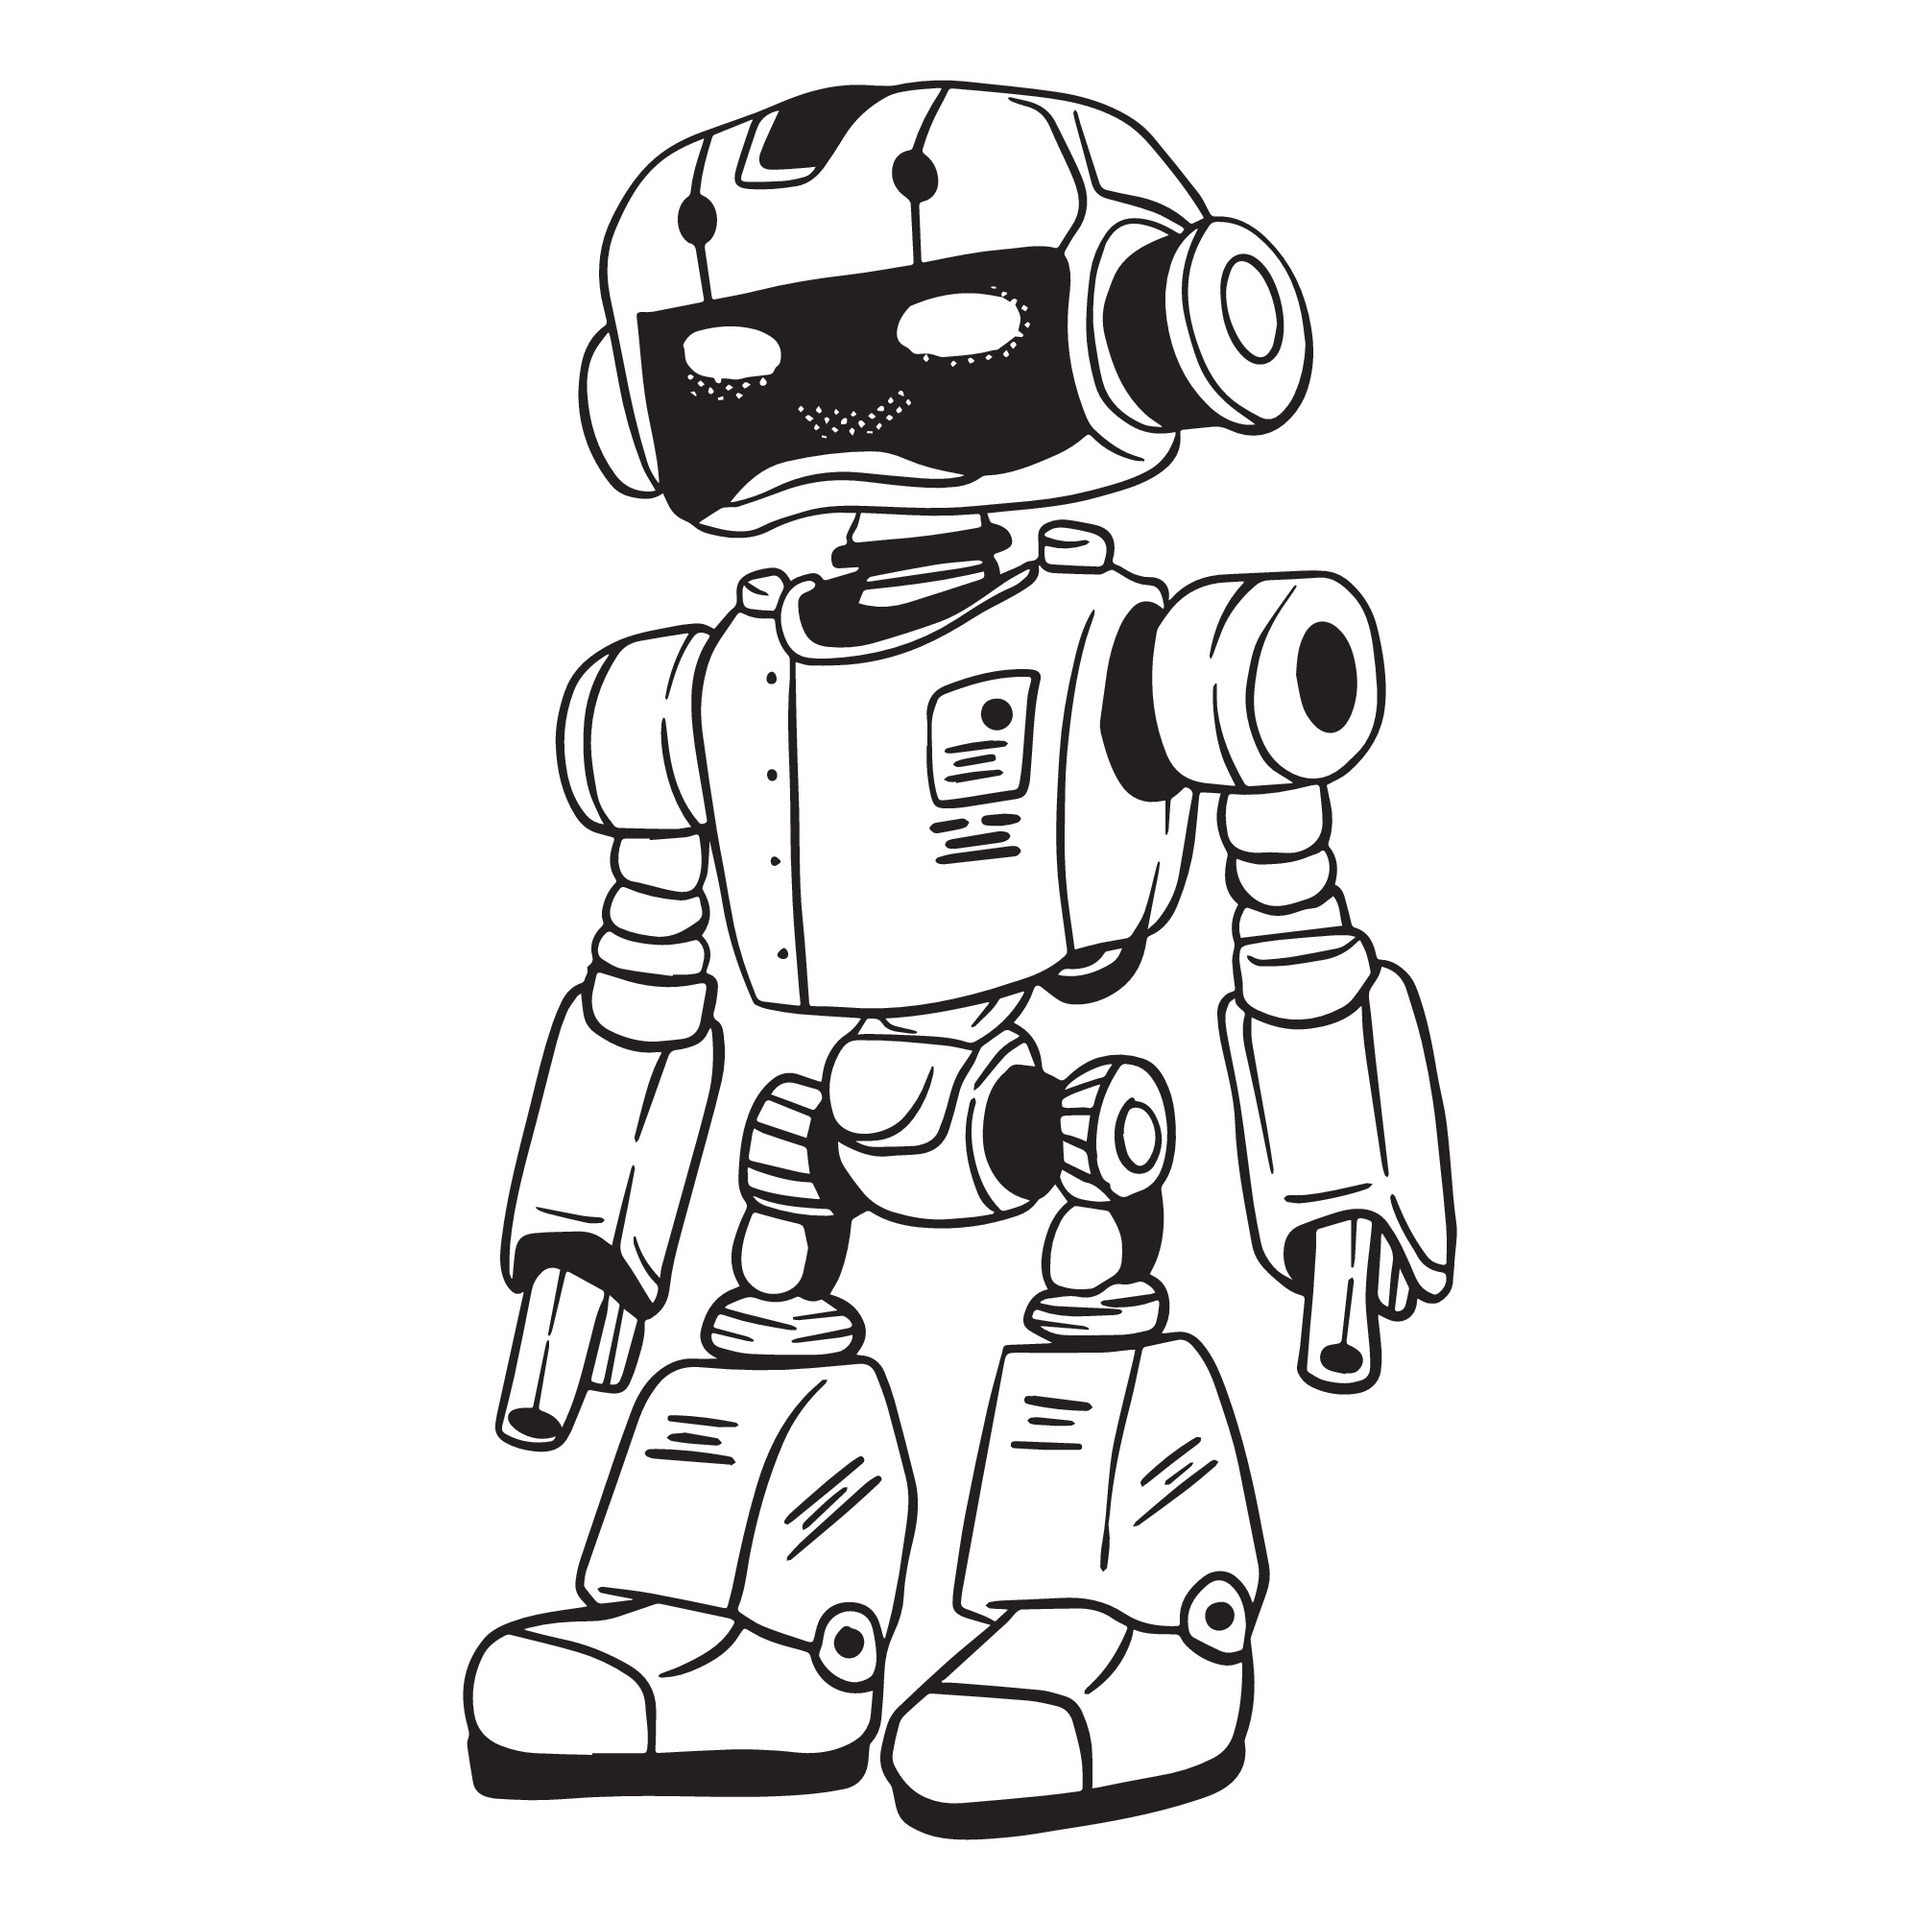 Robot Outline 05 ,good for coloring books, prints, stickers